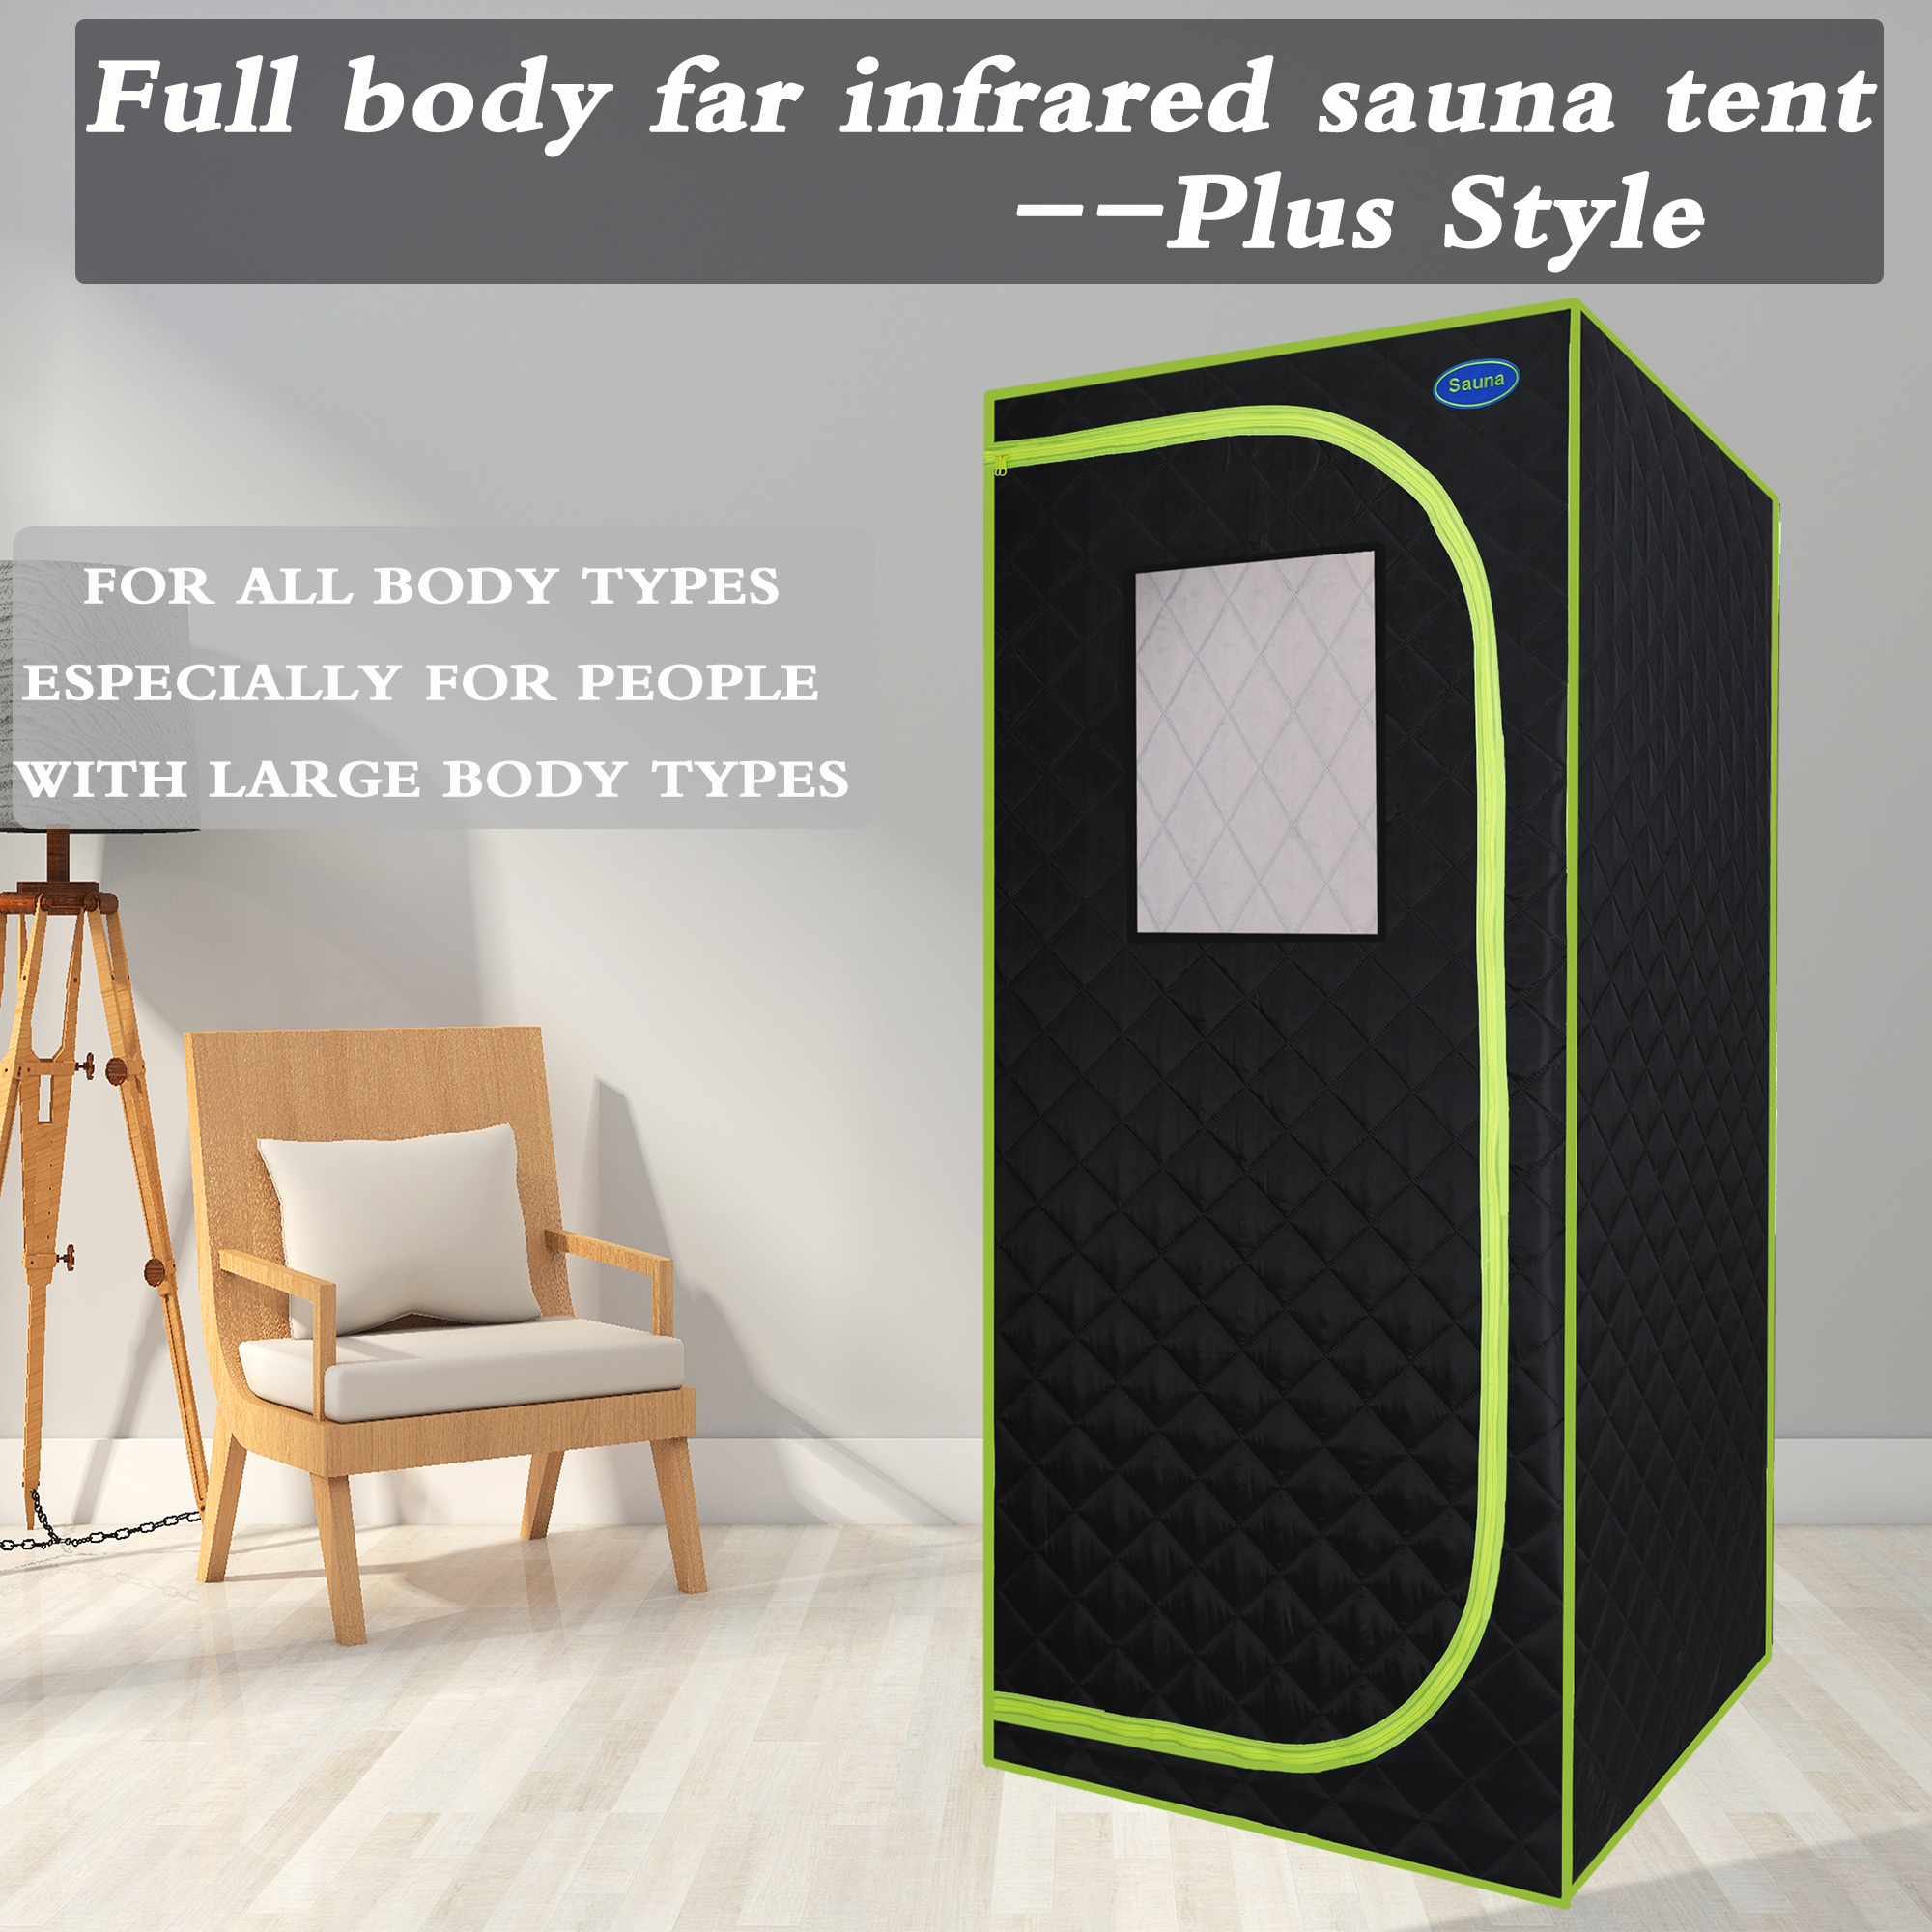 Portable Plus Type Full Size Far Infrared Sauna tent. Spa, Detox ,Therapy and Relaxation at home.Larger Space,Stainless Steel Pipes Connector Easy to Install, with FCC Certification--Black-CASAINC